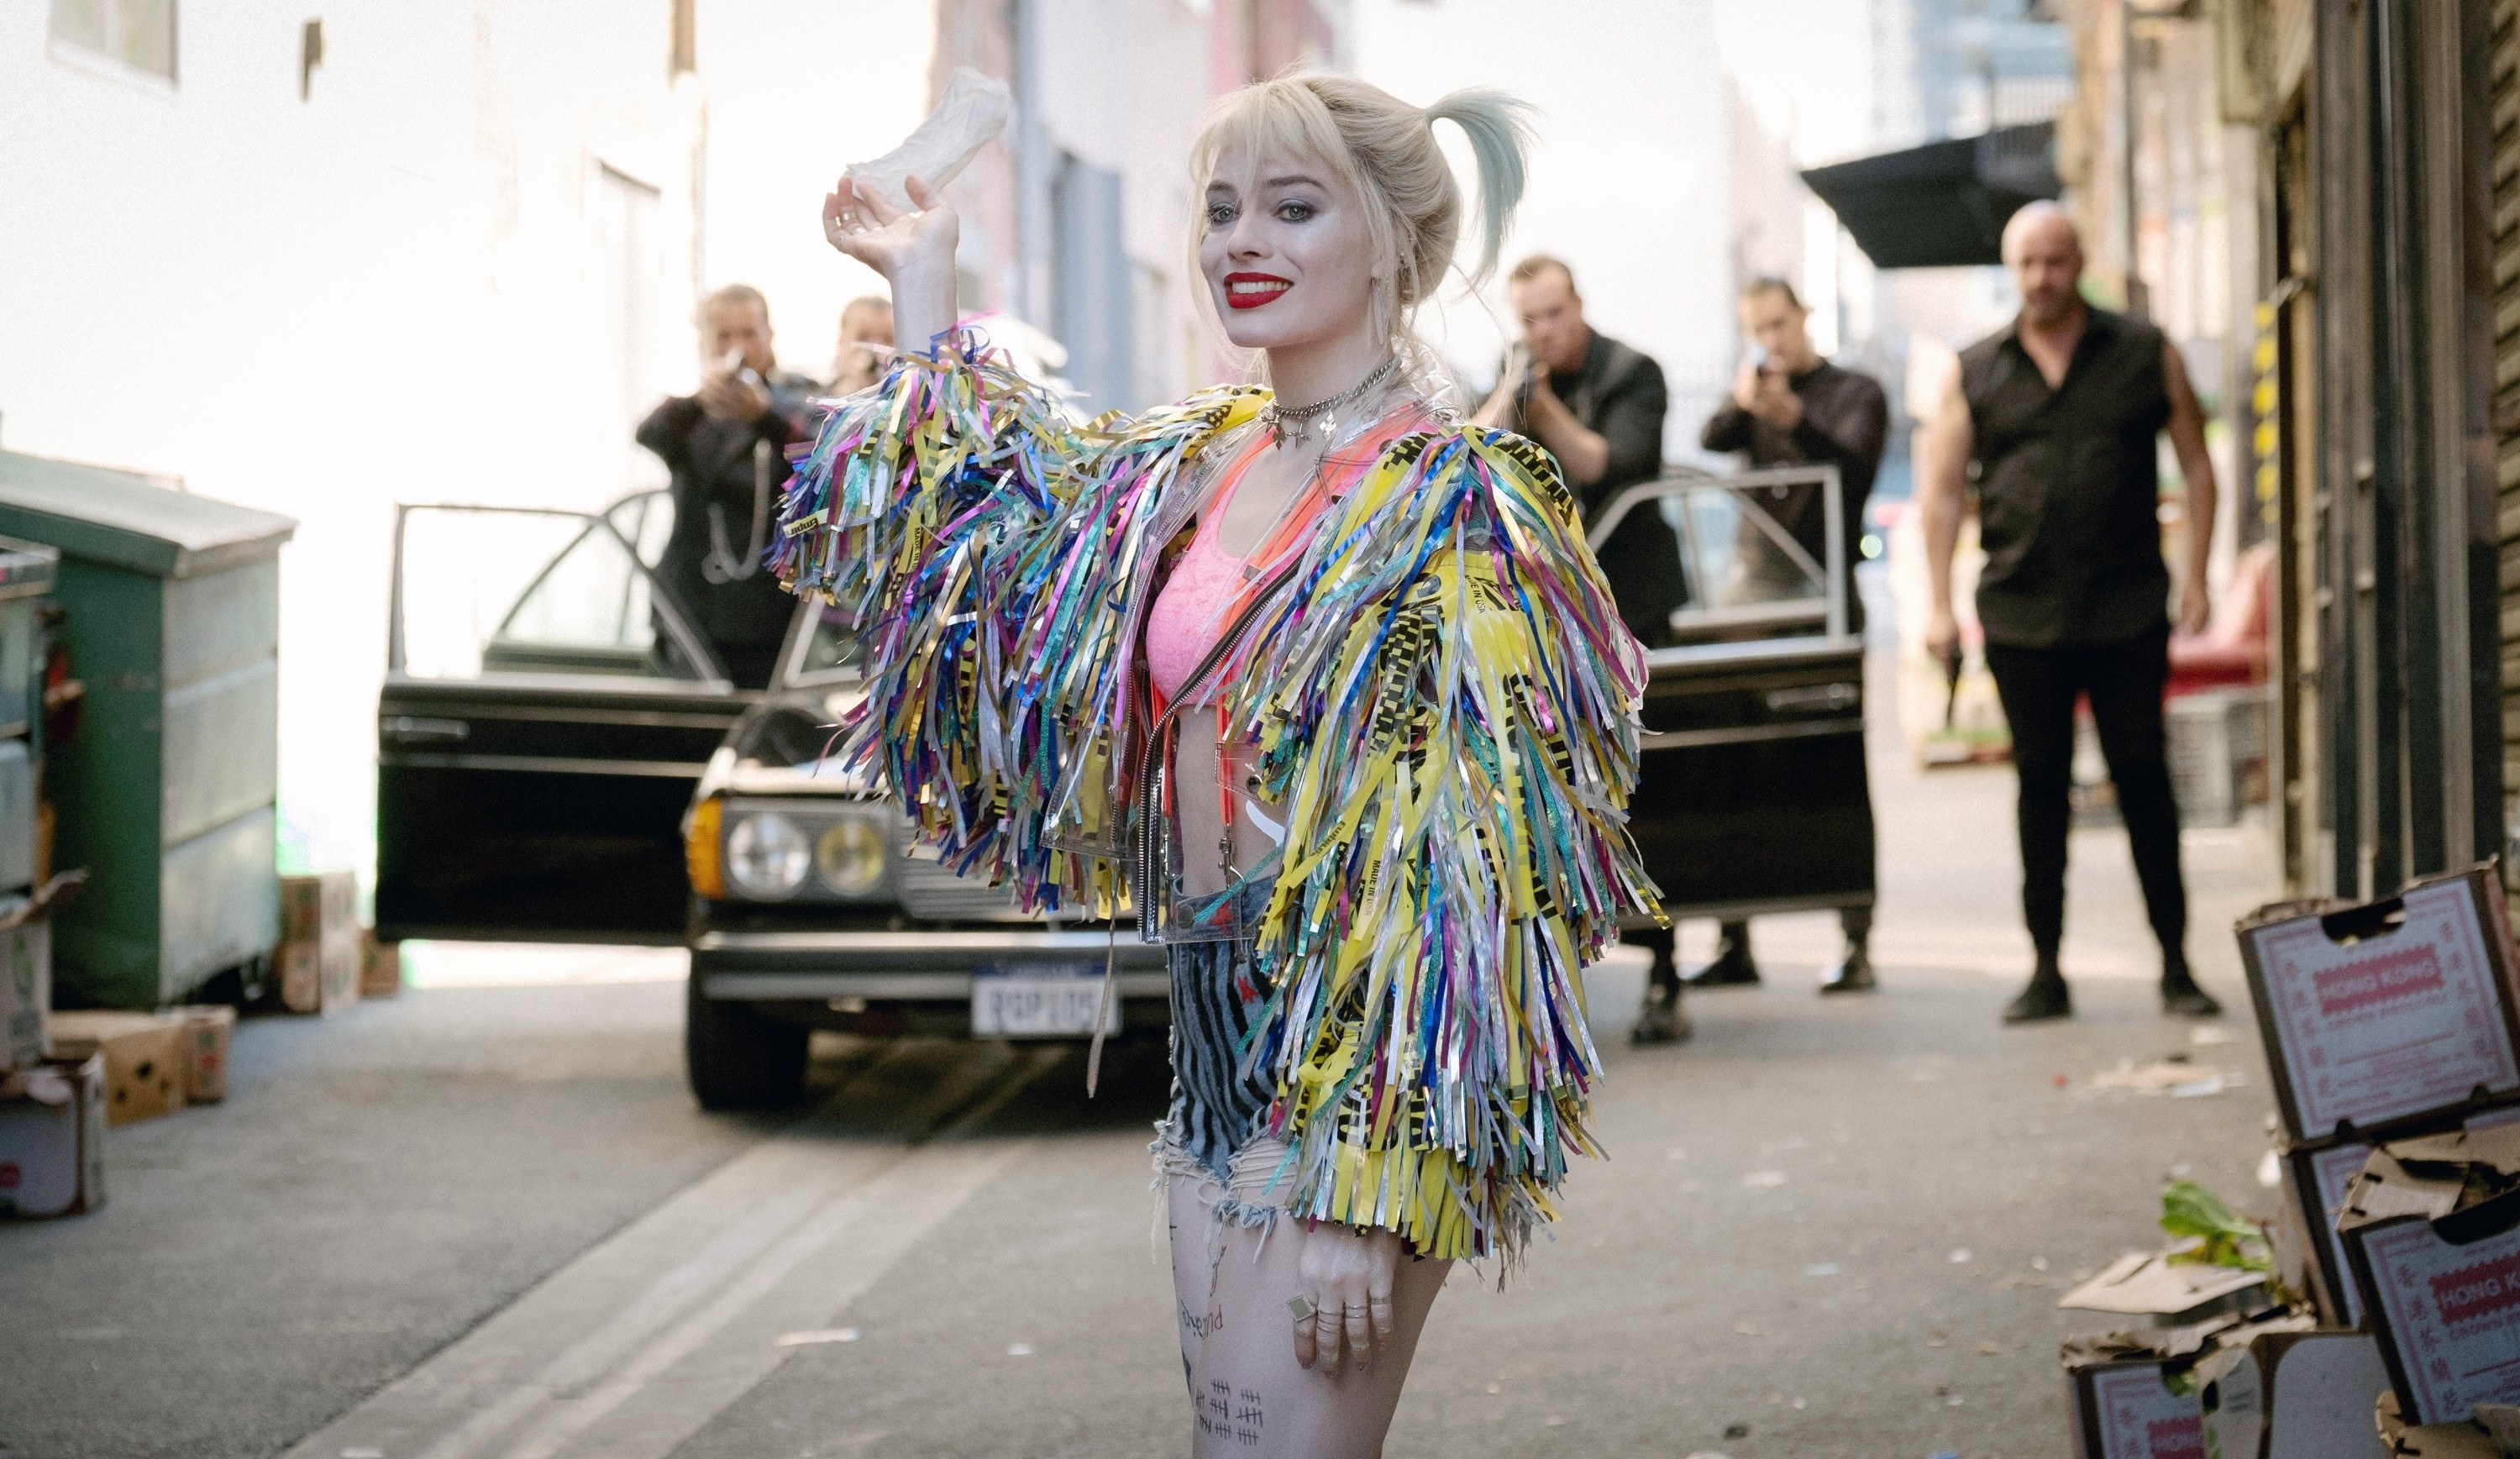 Harley in her suspenders, bright velvet crop tank, and american flag jean shorts from other outfits mentioned, but this time with a thick fringed jacket with lots of shiny confetti pieces and caution tape shredded